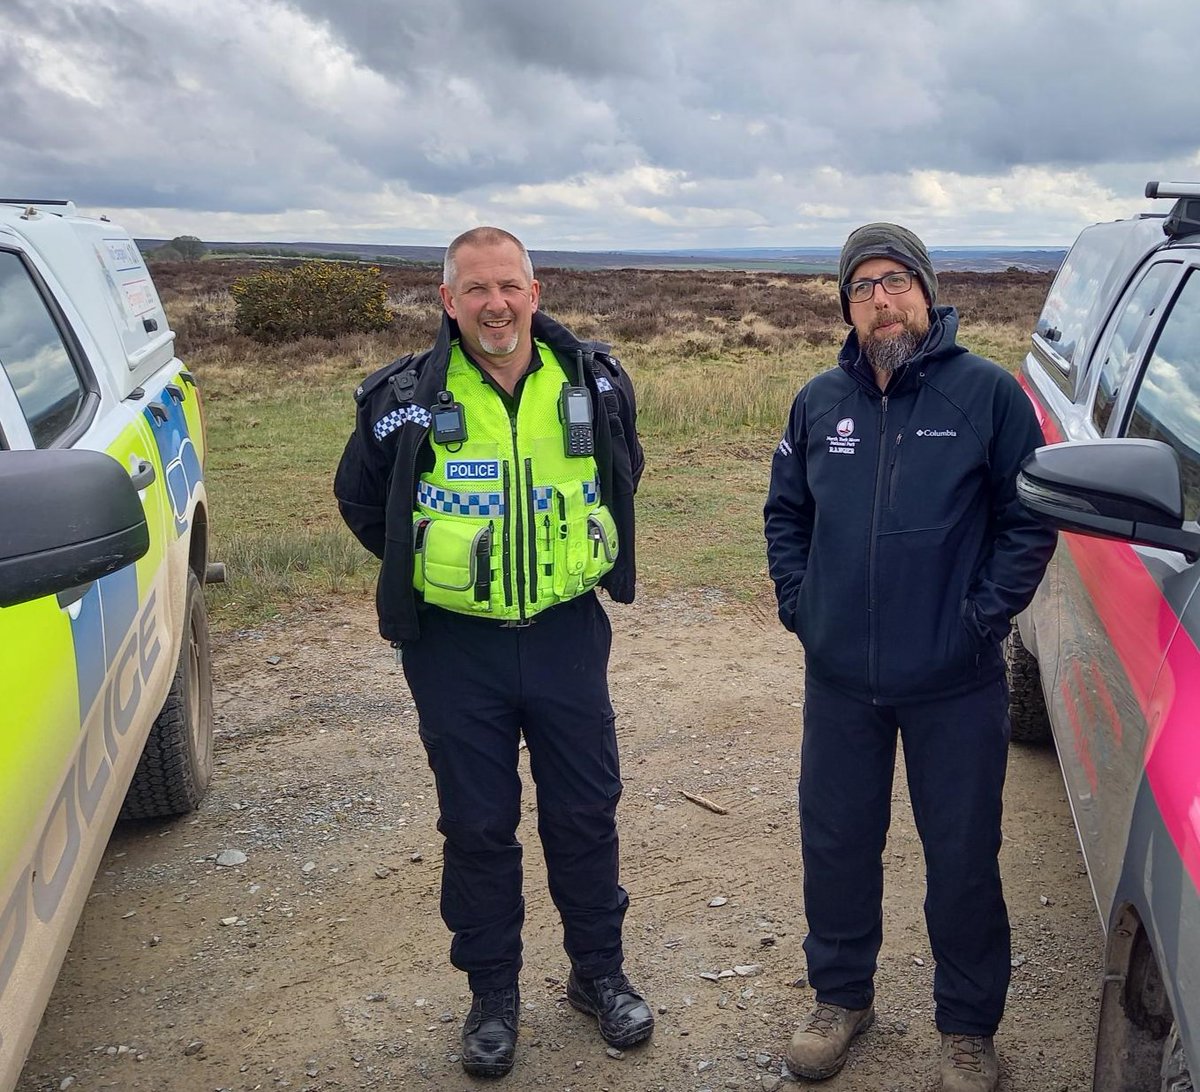 We’ve teamed up with @NorthYorkMoors Rangers to clamp down on illegal off-road motorcycles & 4x4 vehicles causing damage to protected moorland 🚔 

The first patrol was held on Sat (27 April) across an area including Rudland Rigg nr Kirkbymoorside

More⬇️ 
orlo.uk/lsClq